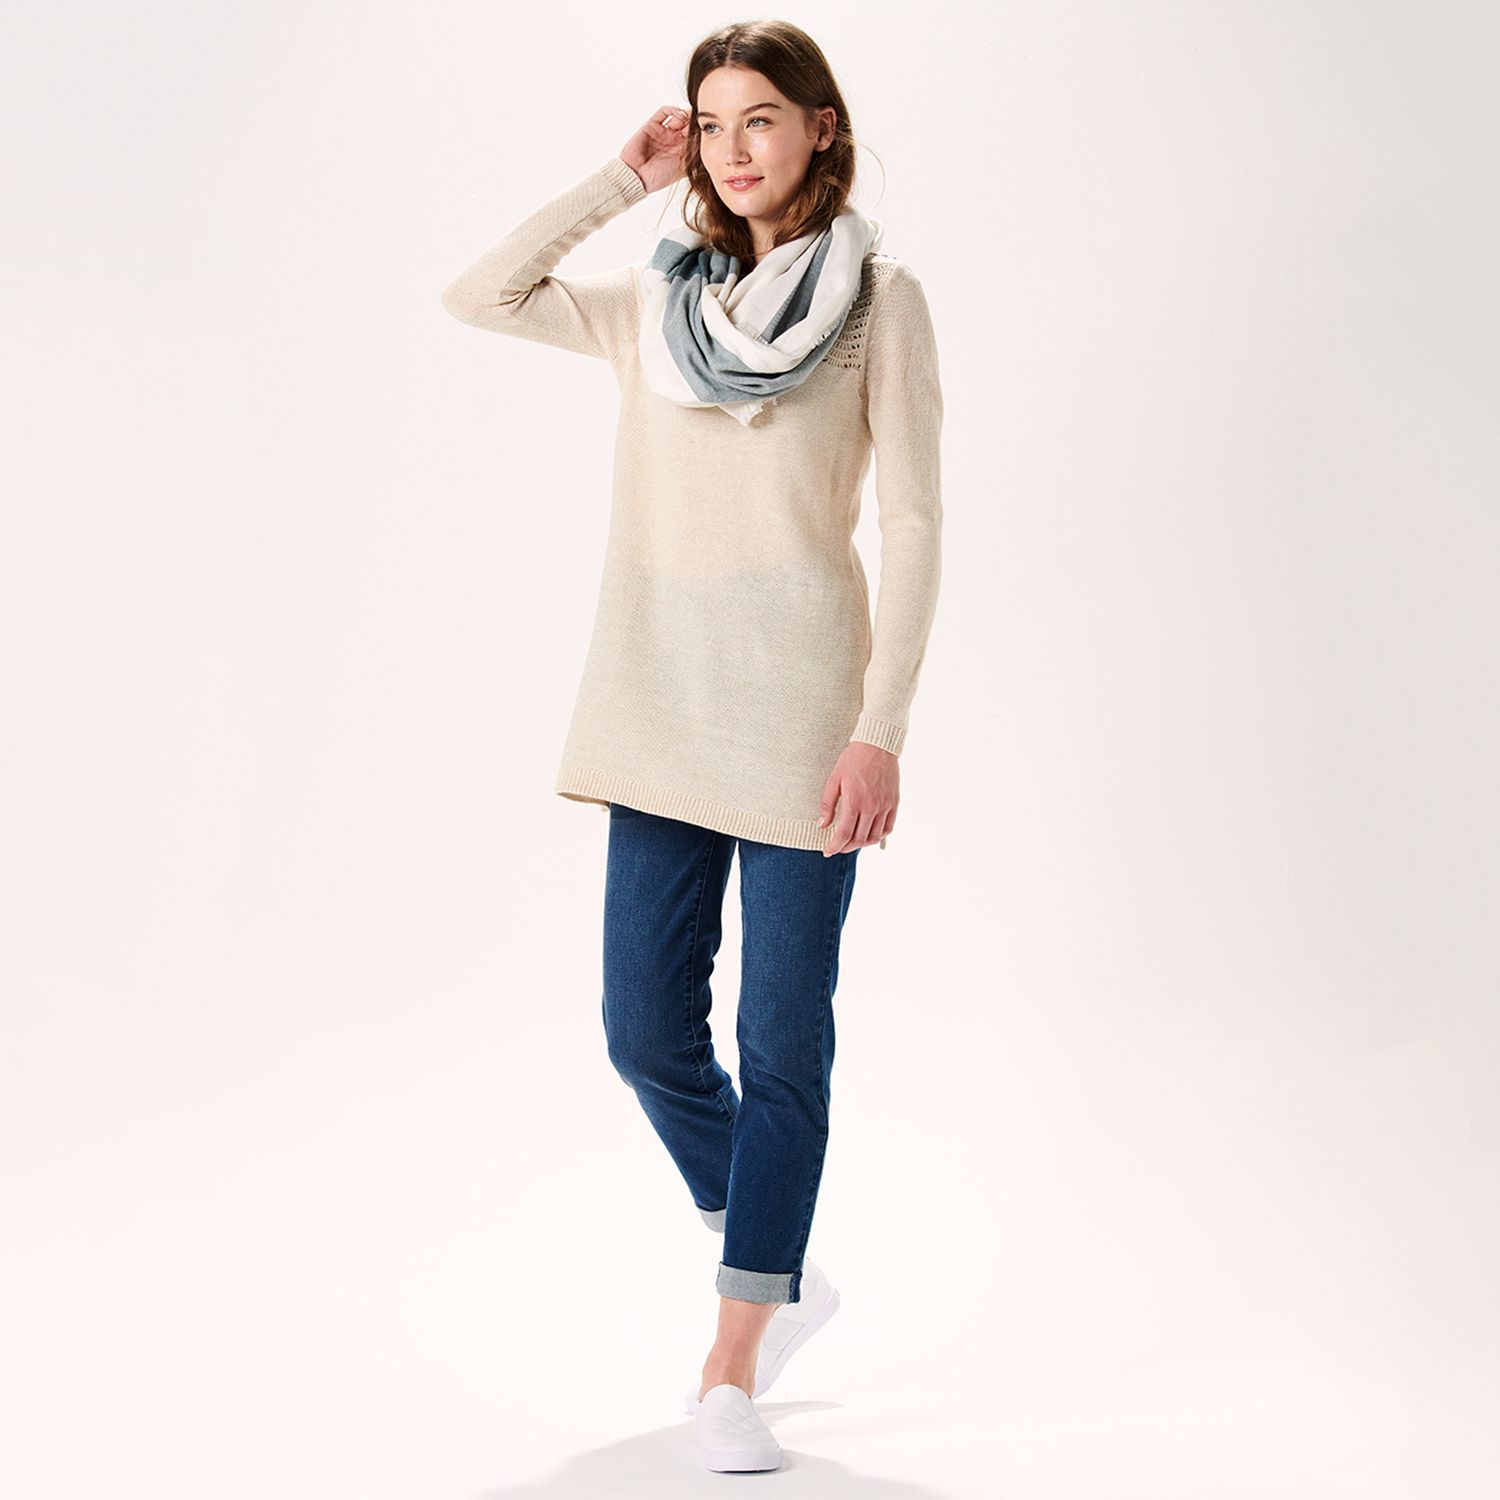 15 Cozy Casual Fall Outfits from Kohls: Outfit Ideas and